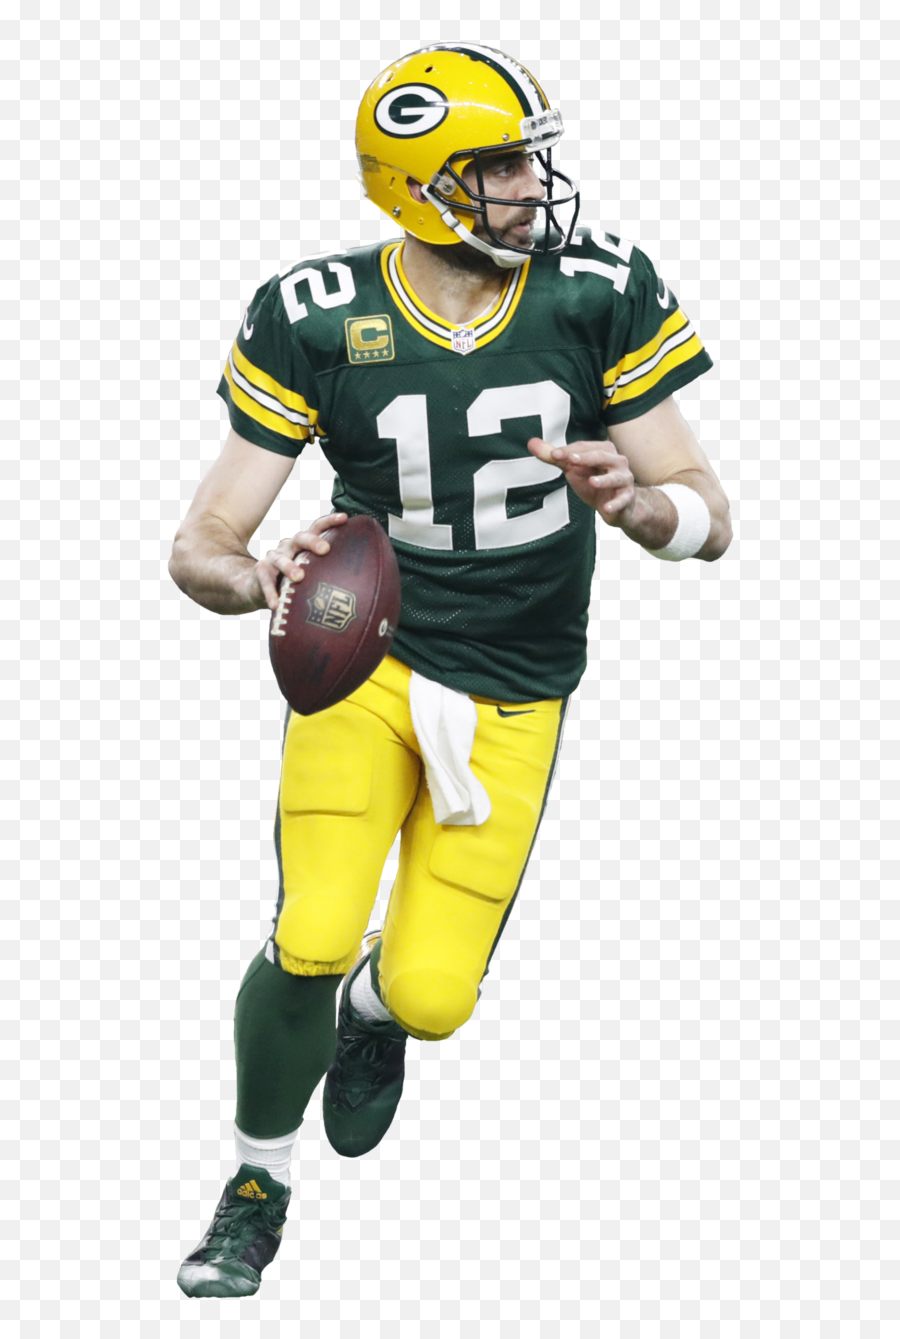 Green Bay Packers Png - Green Bay Packers Uniform,Packers Png